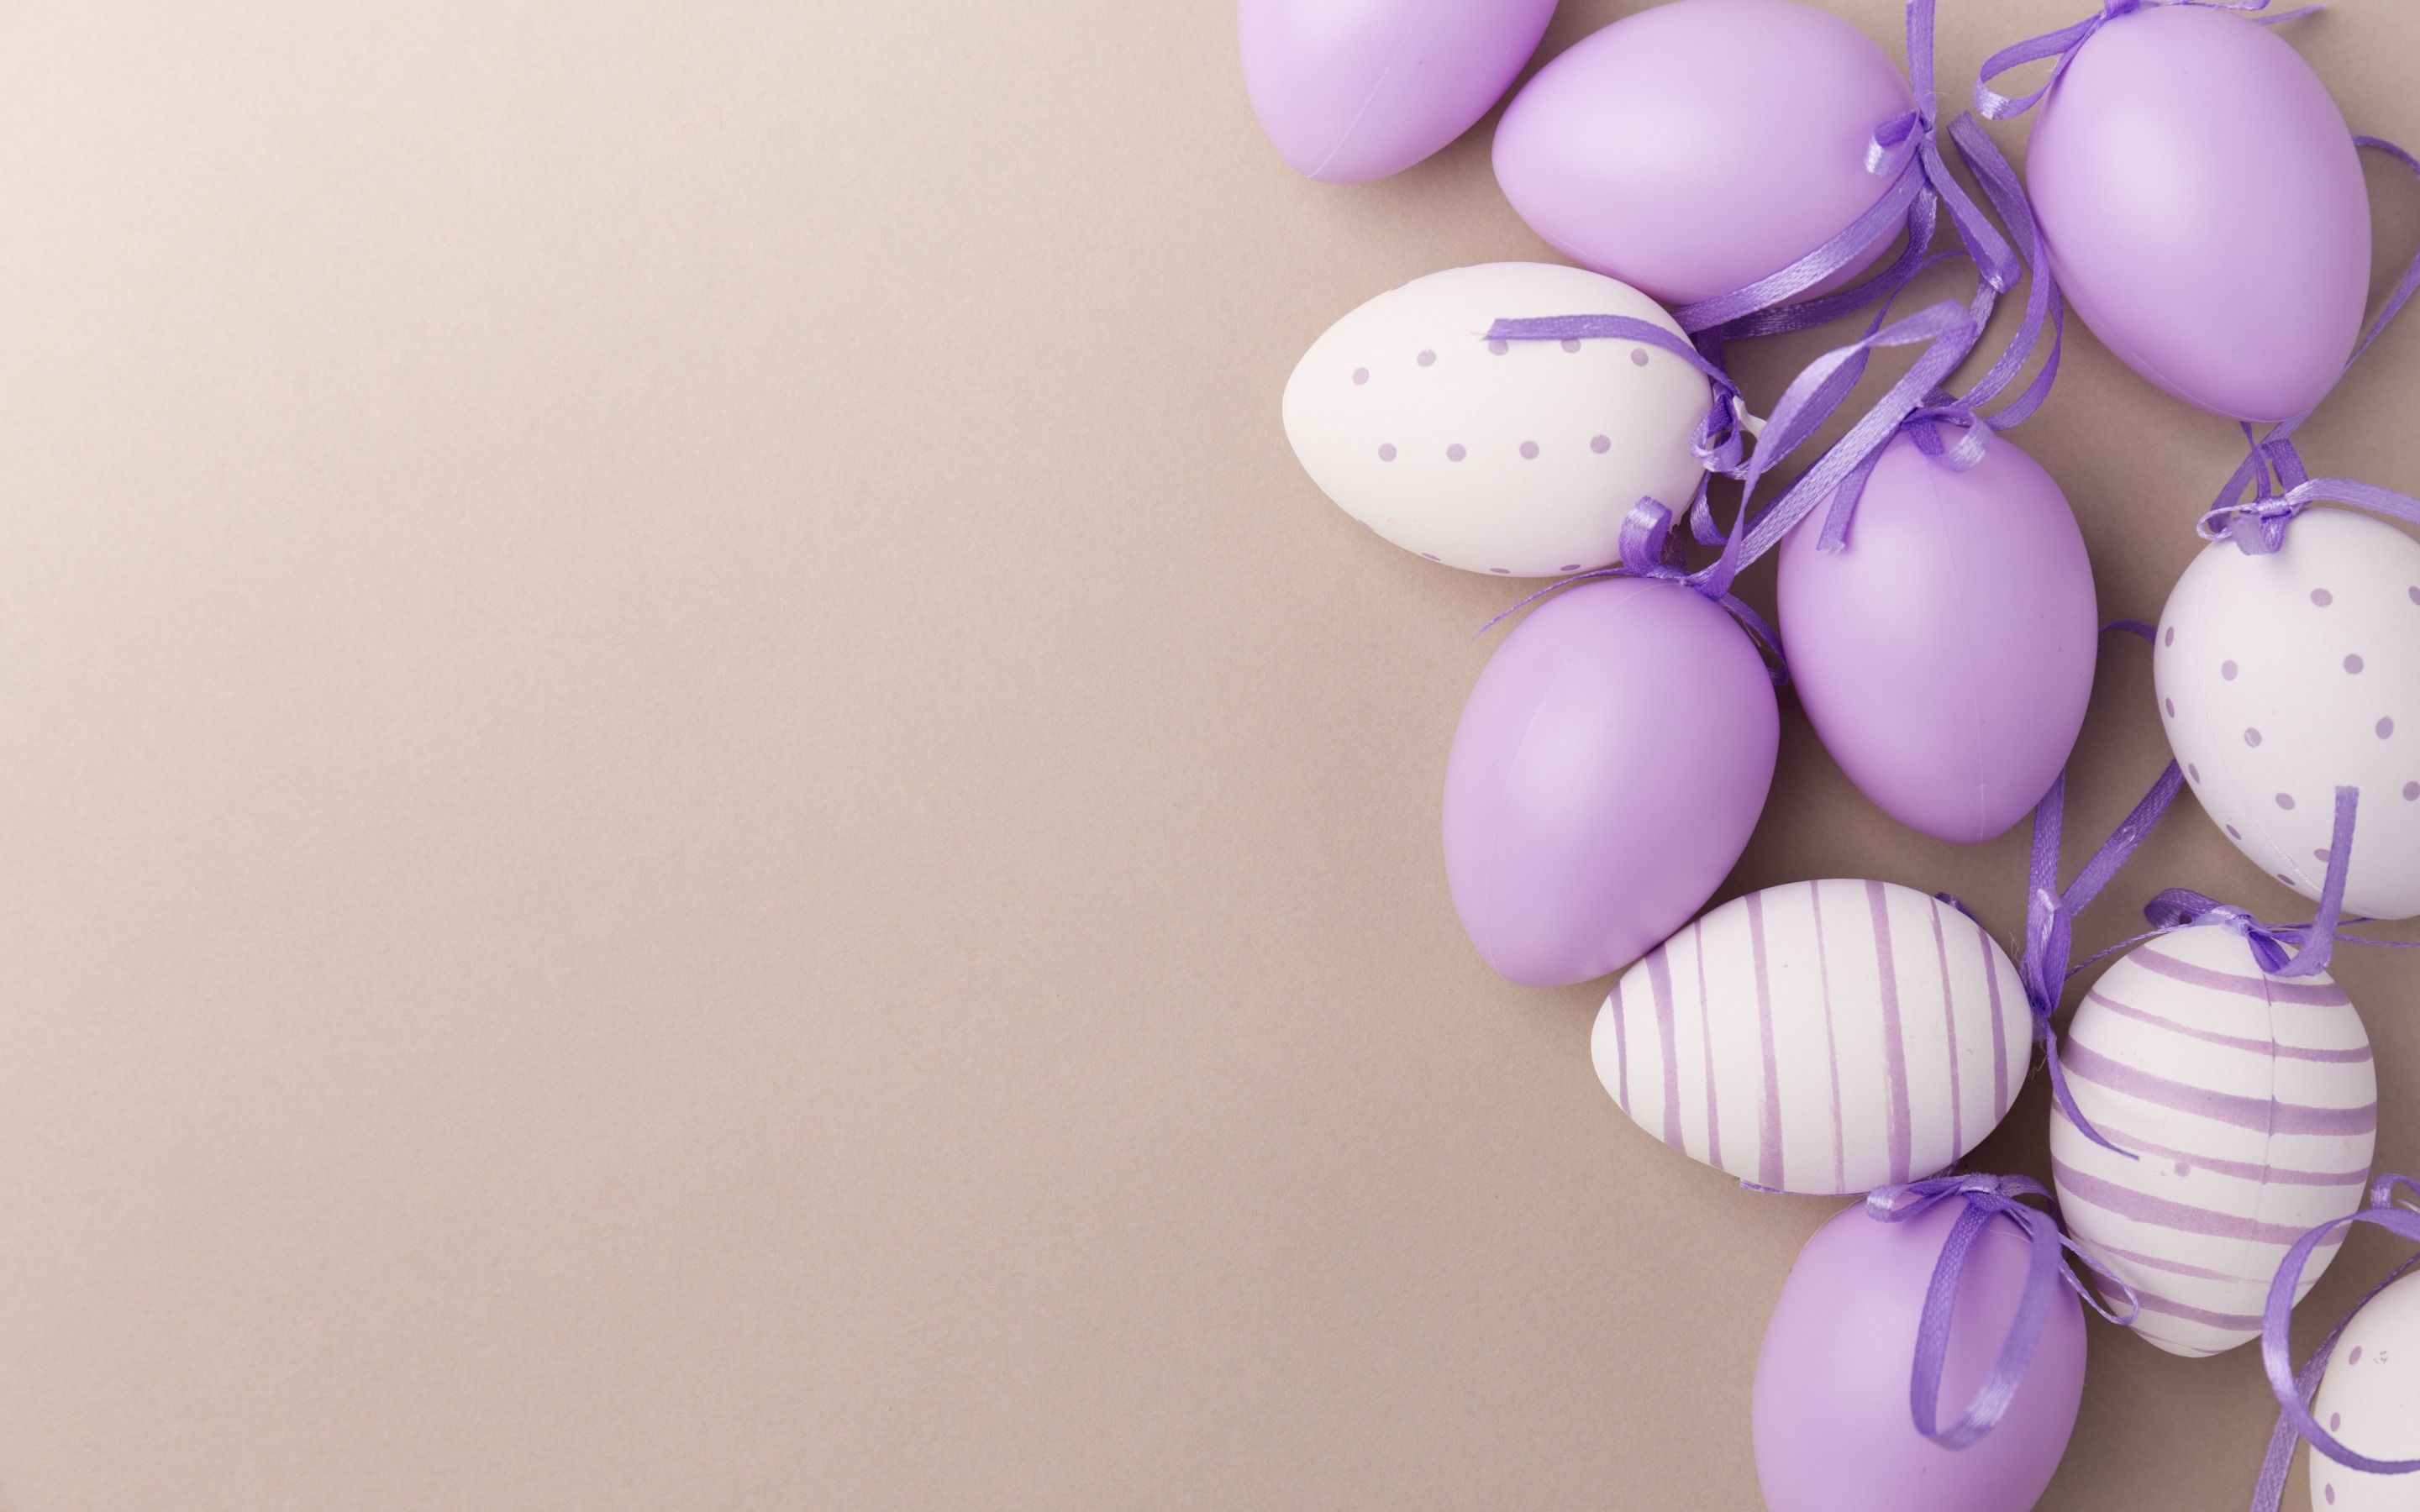 Download wallpaper Easter, purple easter eggs, for the Easter greeting card, April spring for desktop with resolution 2880x1800. High Quality HD picture wallpaper